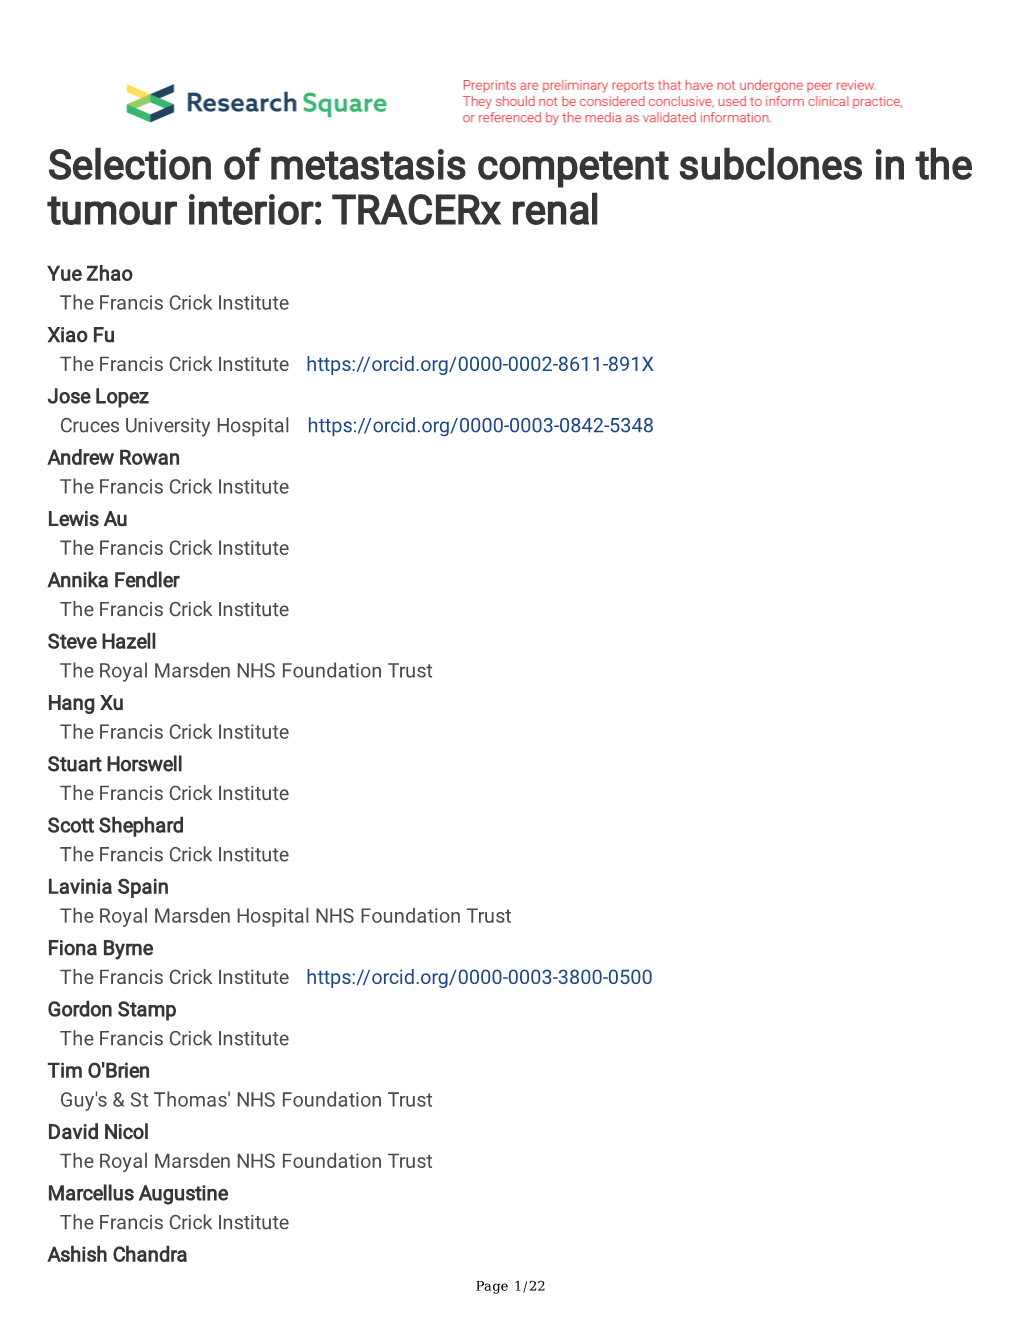 Selection of Metastasis Competent Subclones in the Tumour Interior: Tracerx Renal